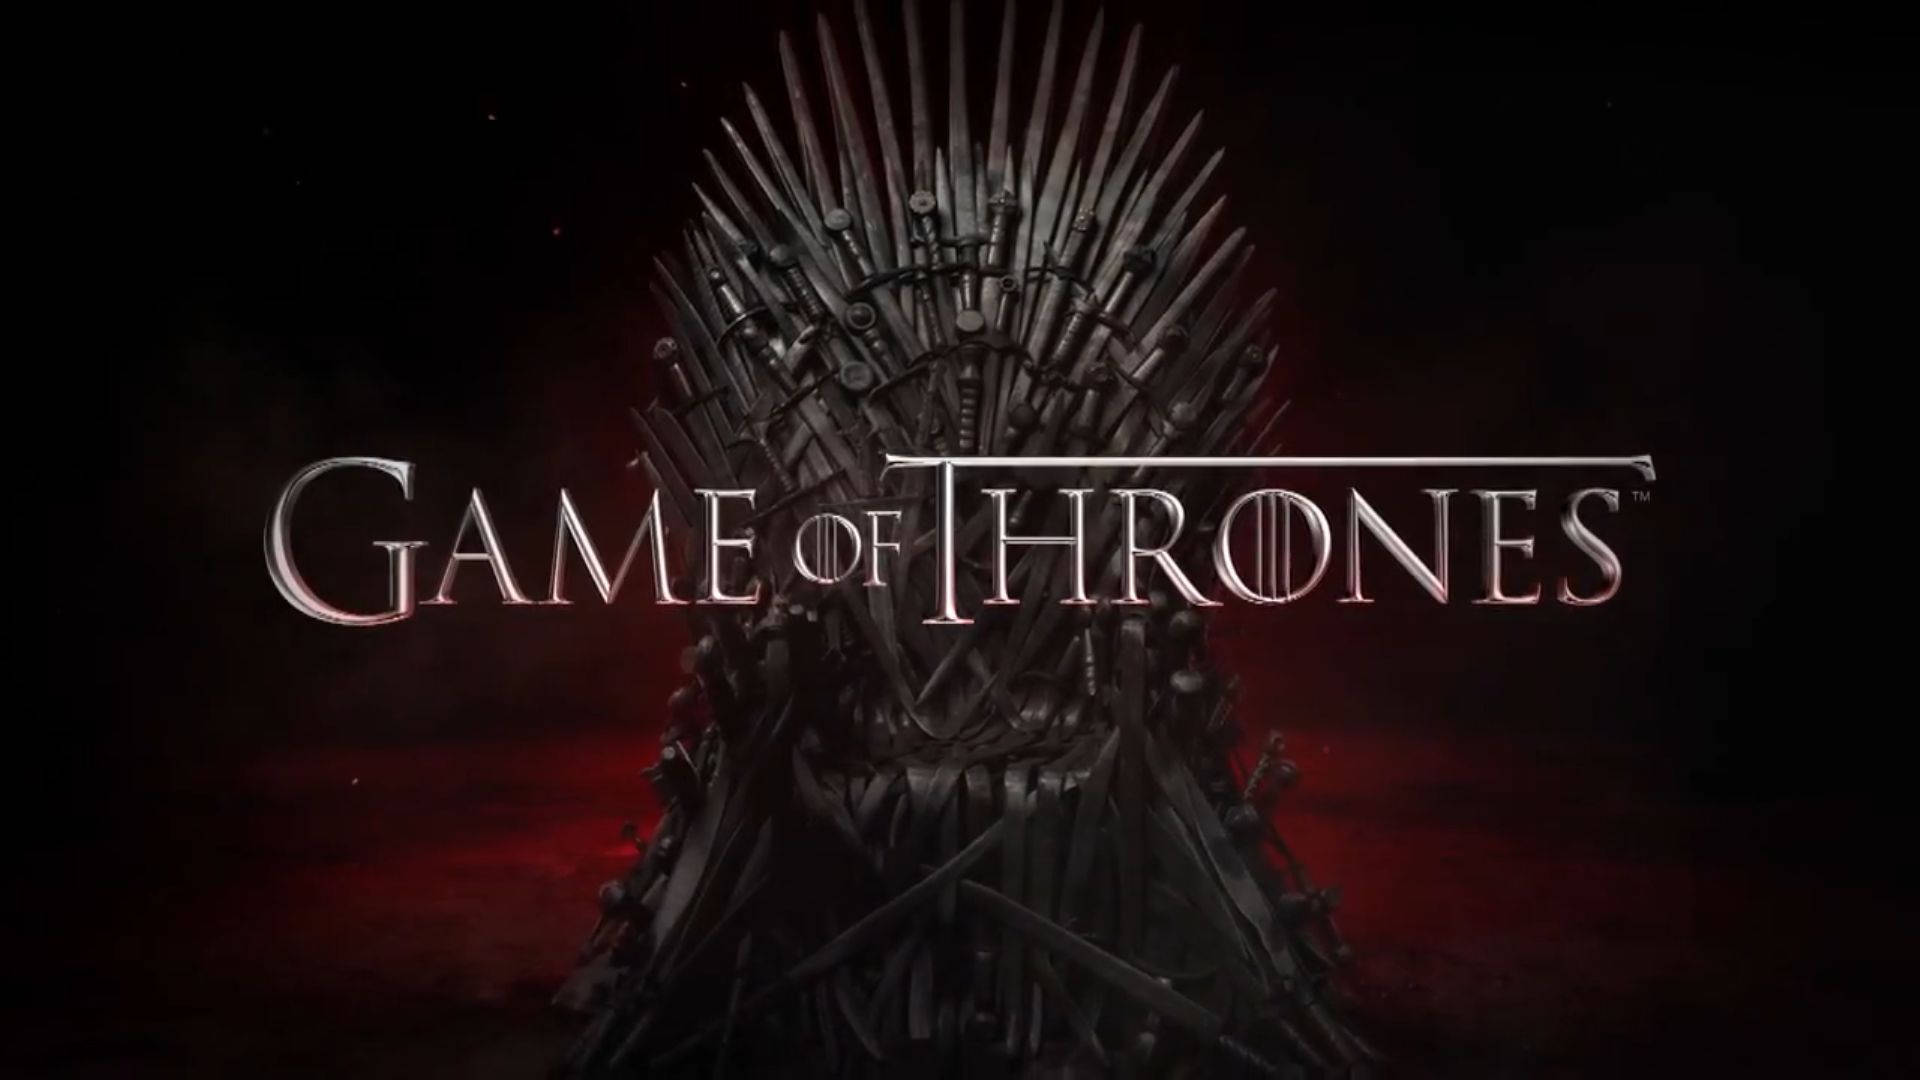 Iron Throne Of Game Of Thrones Background